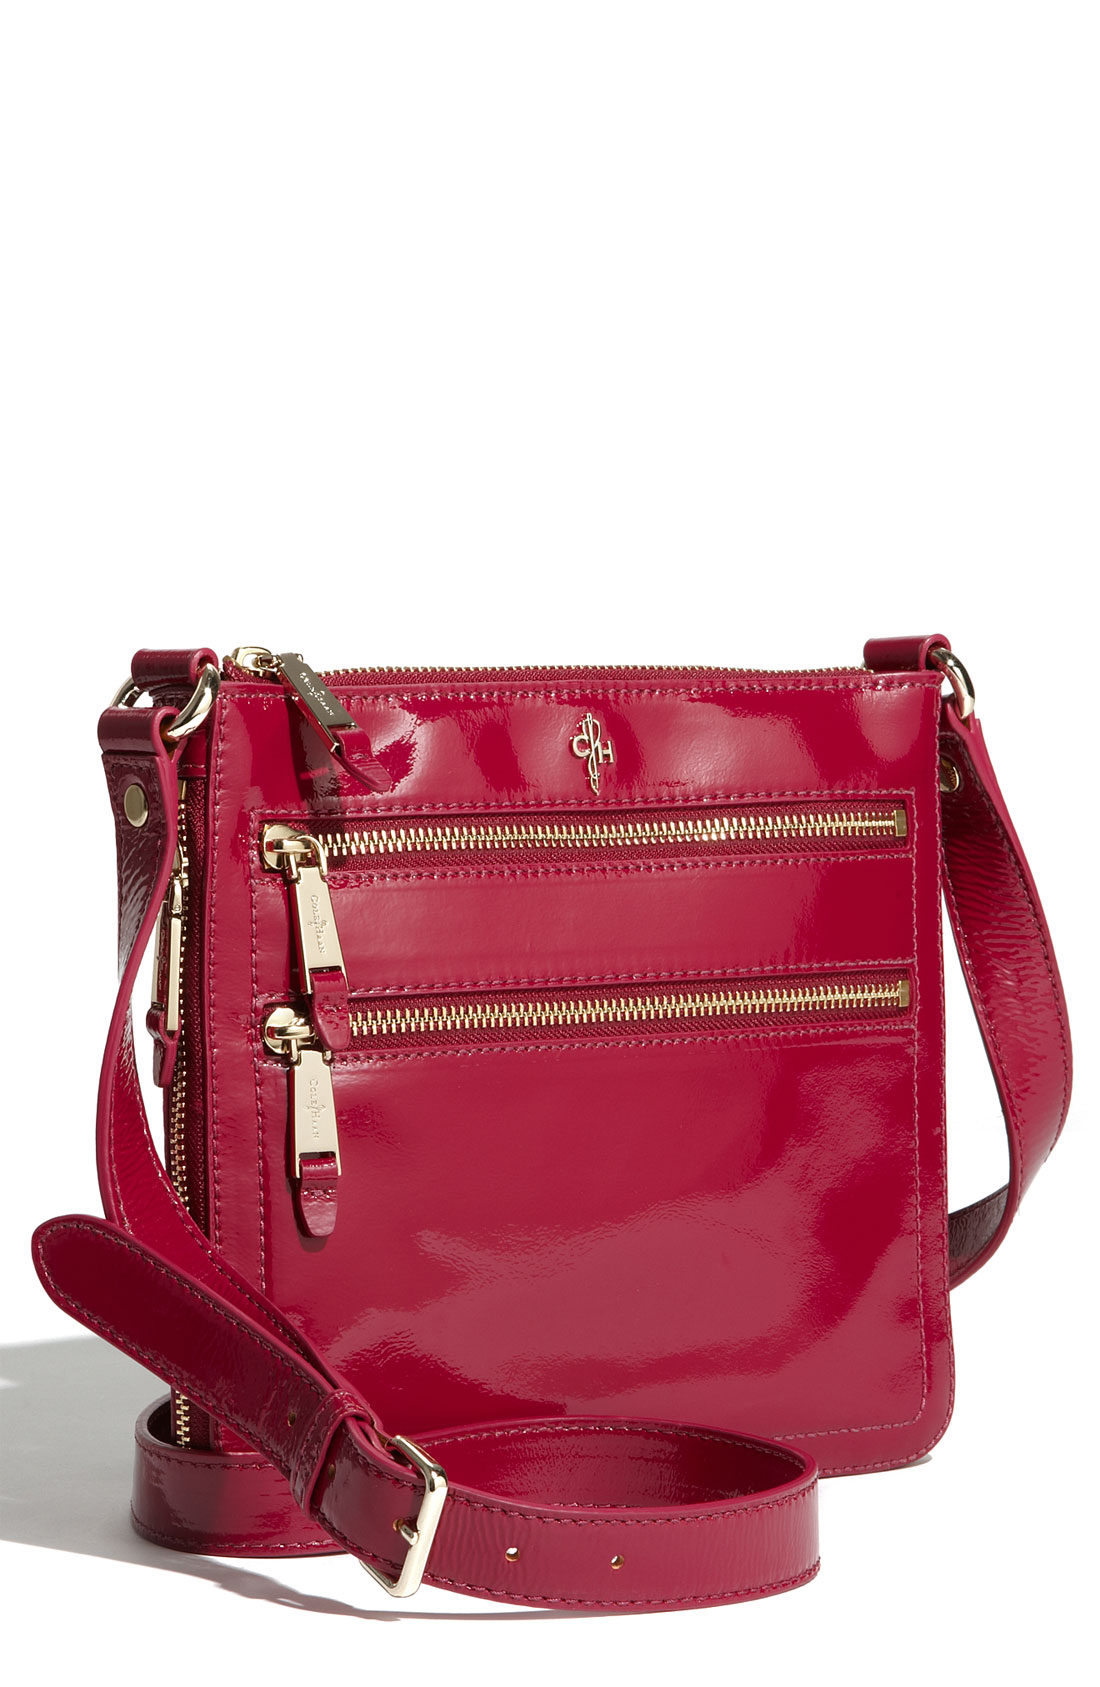 Cole Haan Jitney Sheila Patent Leather Crossbody Bag in Red (beaujols p